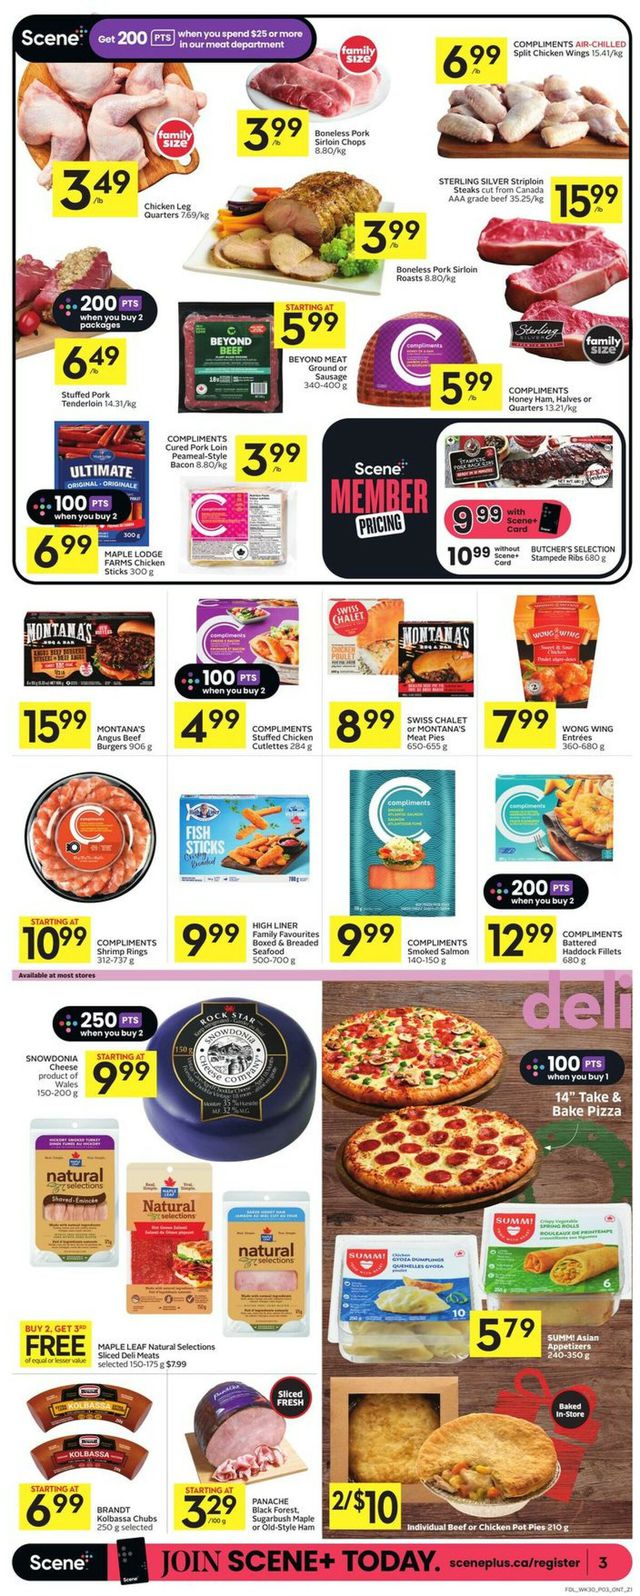 Foodland Flyer from 11/24/2022